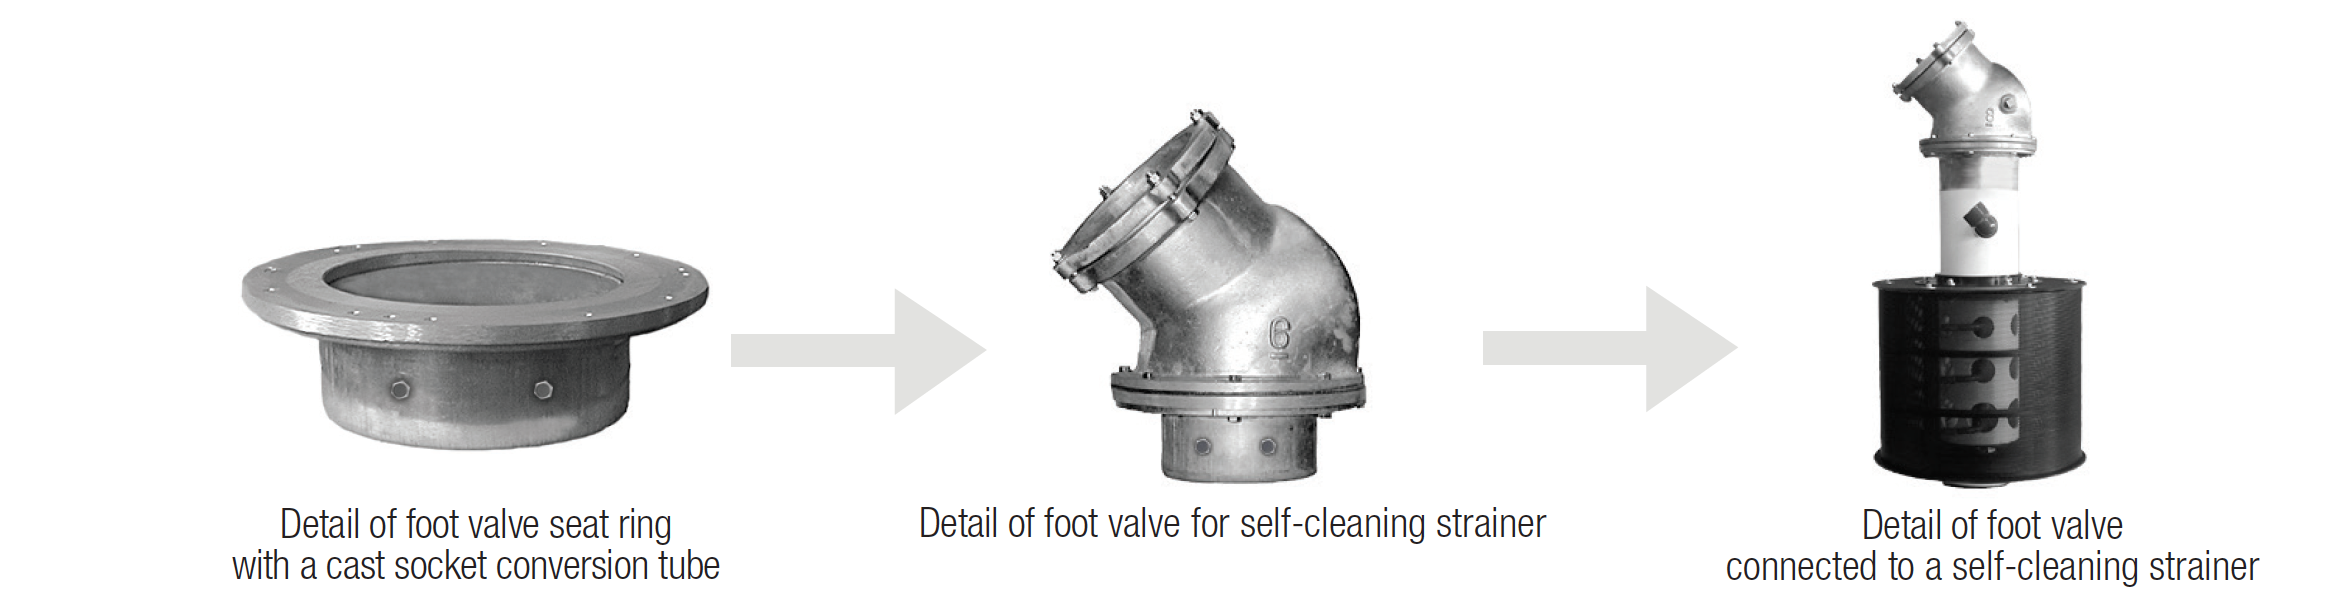 foot valve with self cleaning strainer